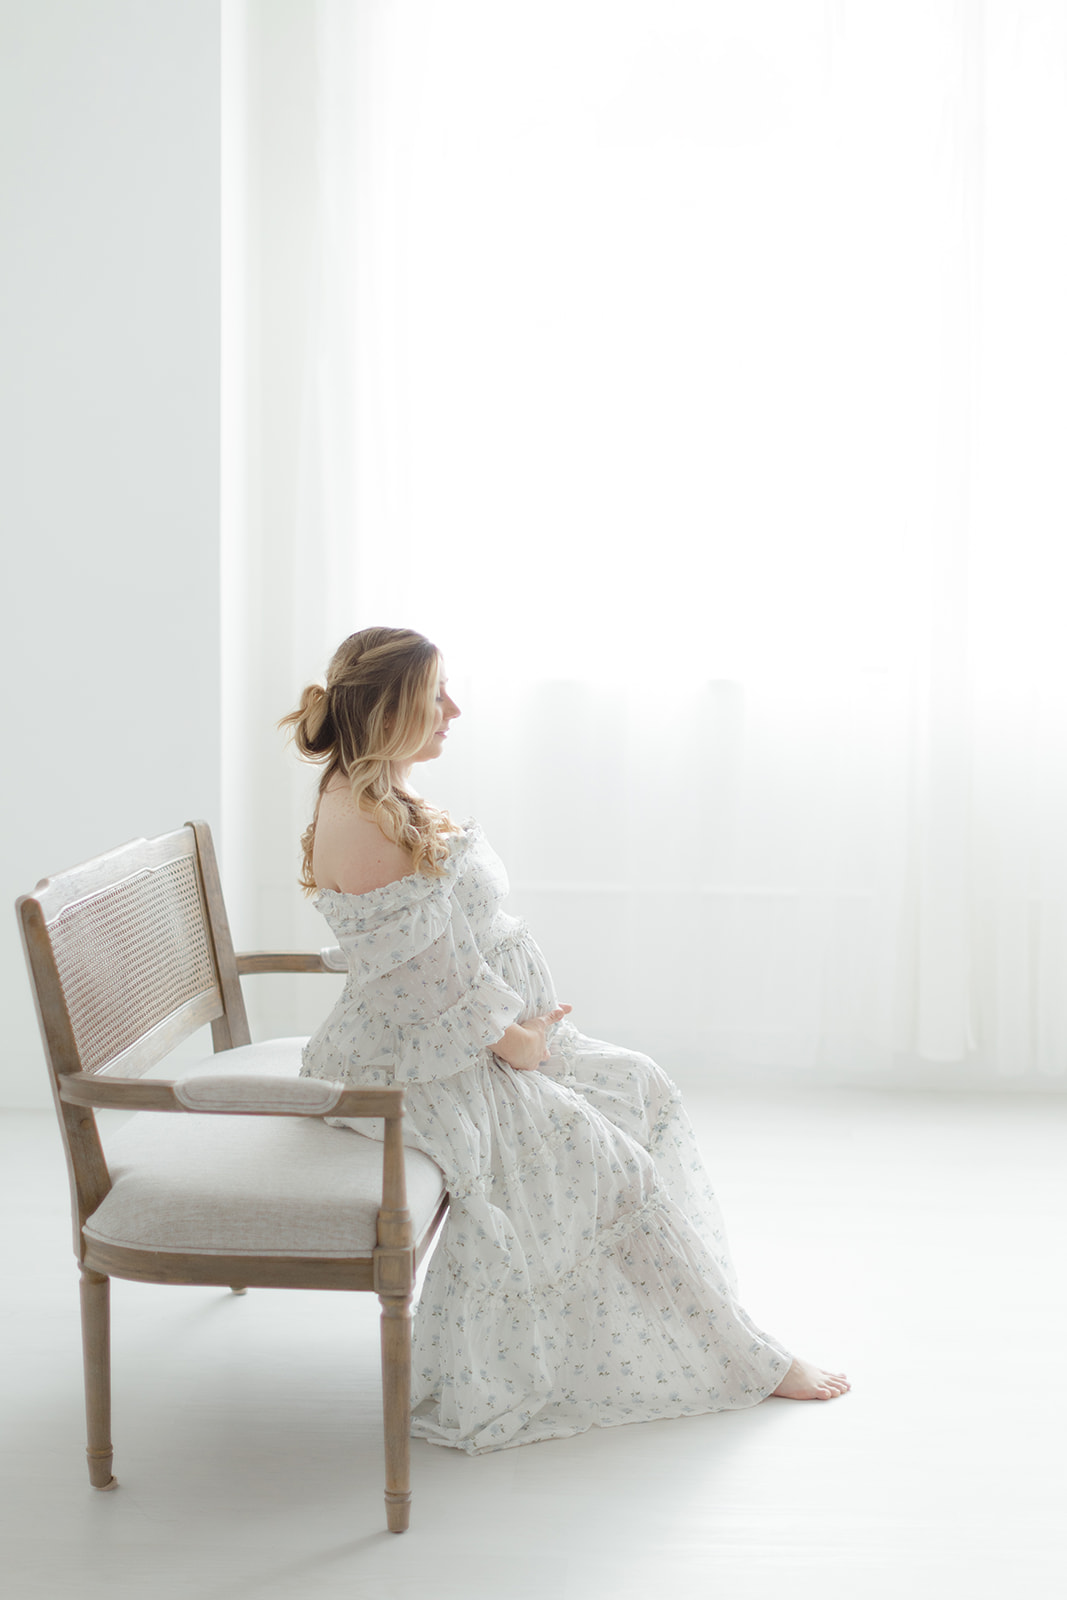 A pregnant woman sits on a bench in a studio in a white maternity dress holding her bump